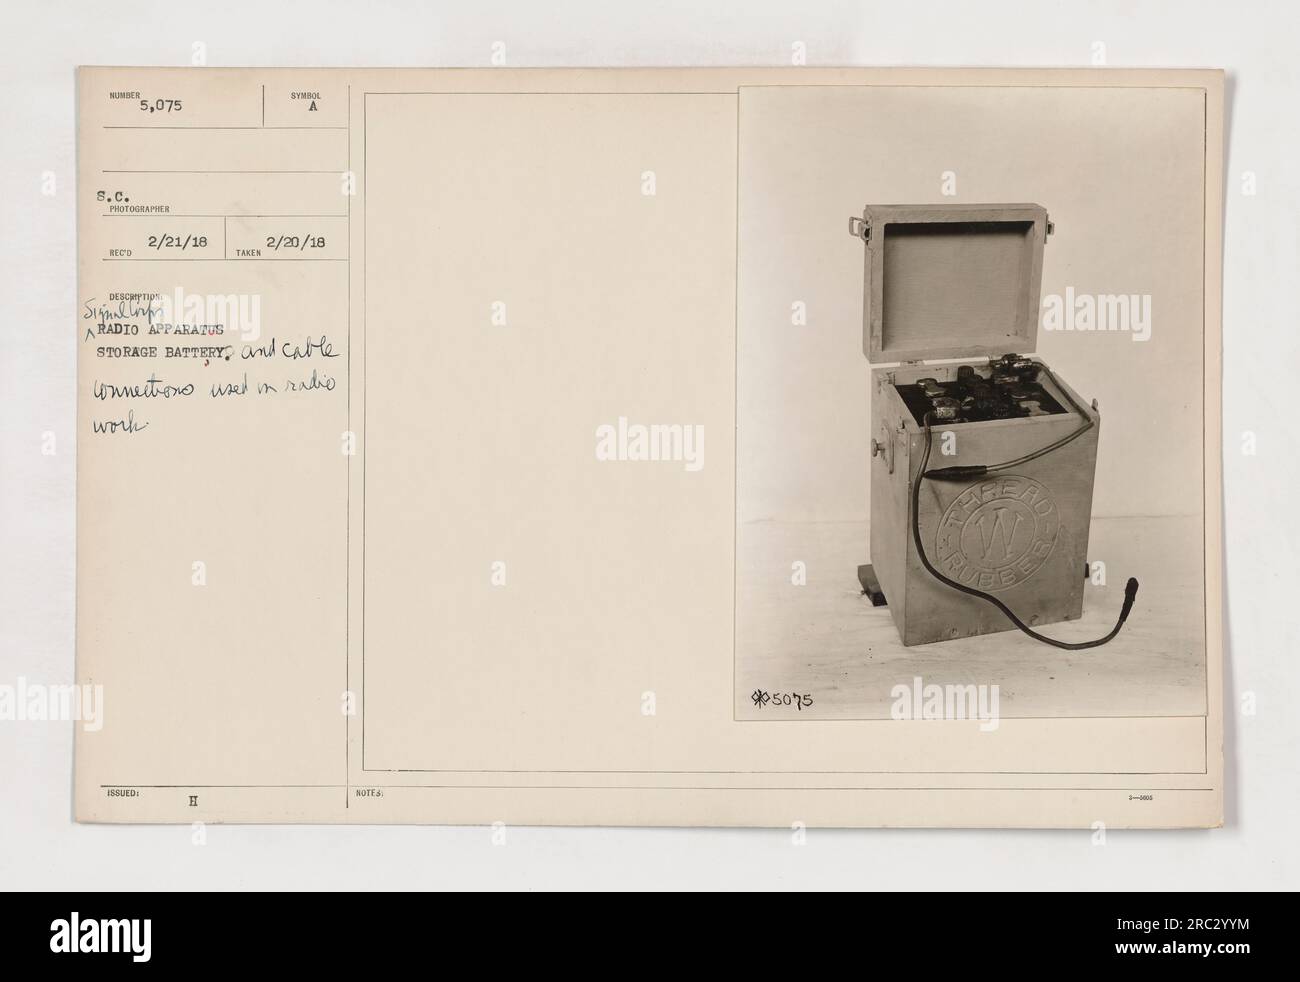 Figure 111-SC-5075 depicts a storage battery and cable connections used in radio work during World War One. This photo was taken on February 21, 1918, in Mexico. The image shows a close-up of the apparatus used for radio communication, including the battery and its associated cables. Stock Photo